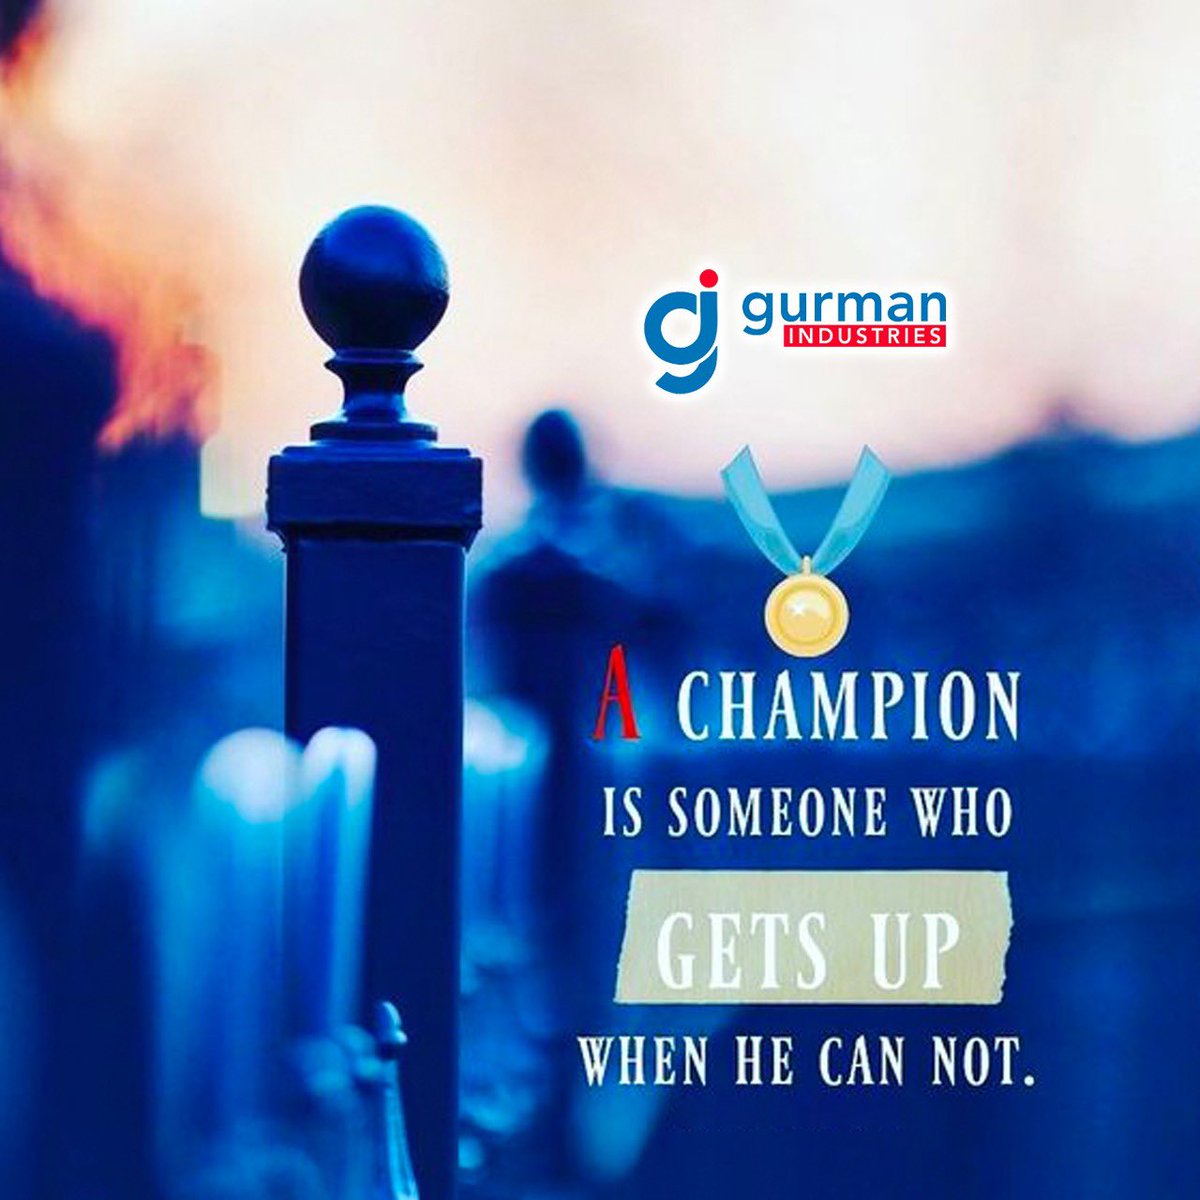 #A #Champion #Is #Someone #Who #Gets #Up #When #He #Can #Not #GurmanIndustries